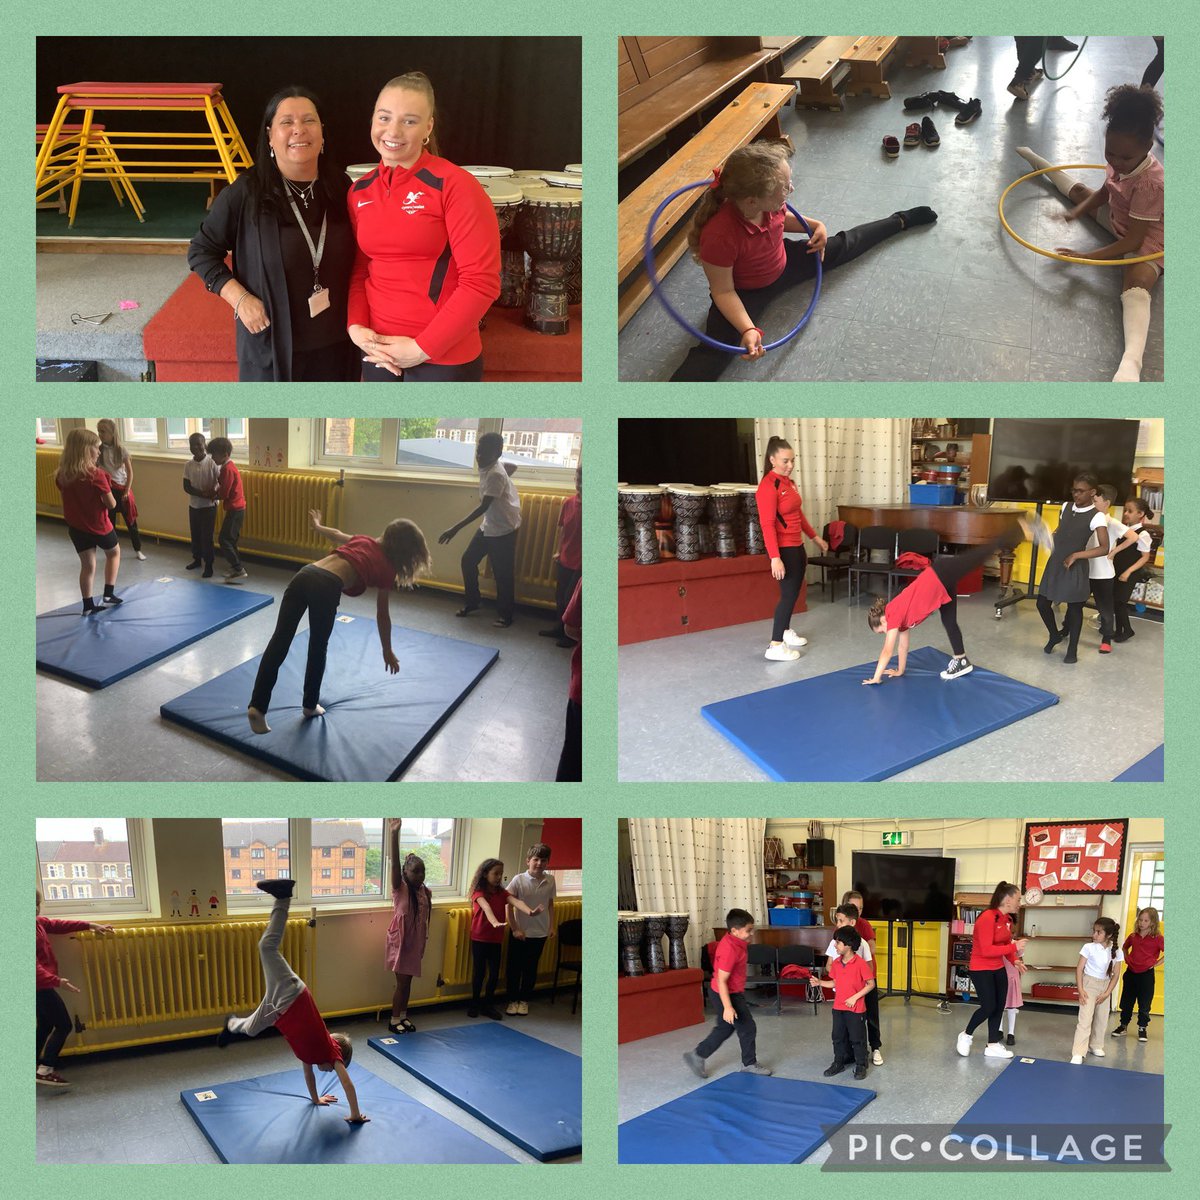 Diolch yn fawr to Gemma and Sophia for visiting Yr3 today. We loved talking with you and practising our gymnastics. Mrs Bond came to talk about her memories from 1978 when she represented Wales in the Commonwealth games👍🏽🏅😍@TeamWales #inspiredtokeepontraining #welovegymnastics